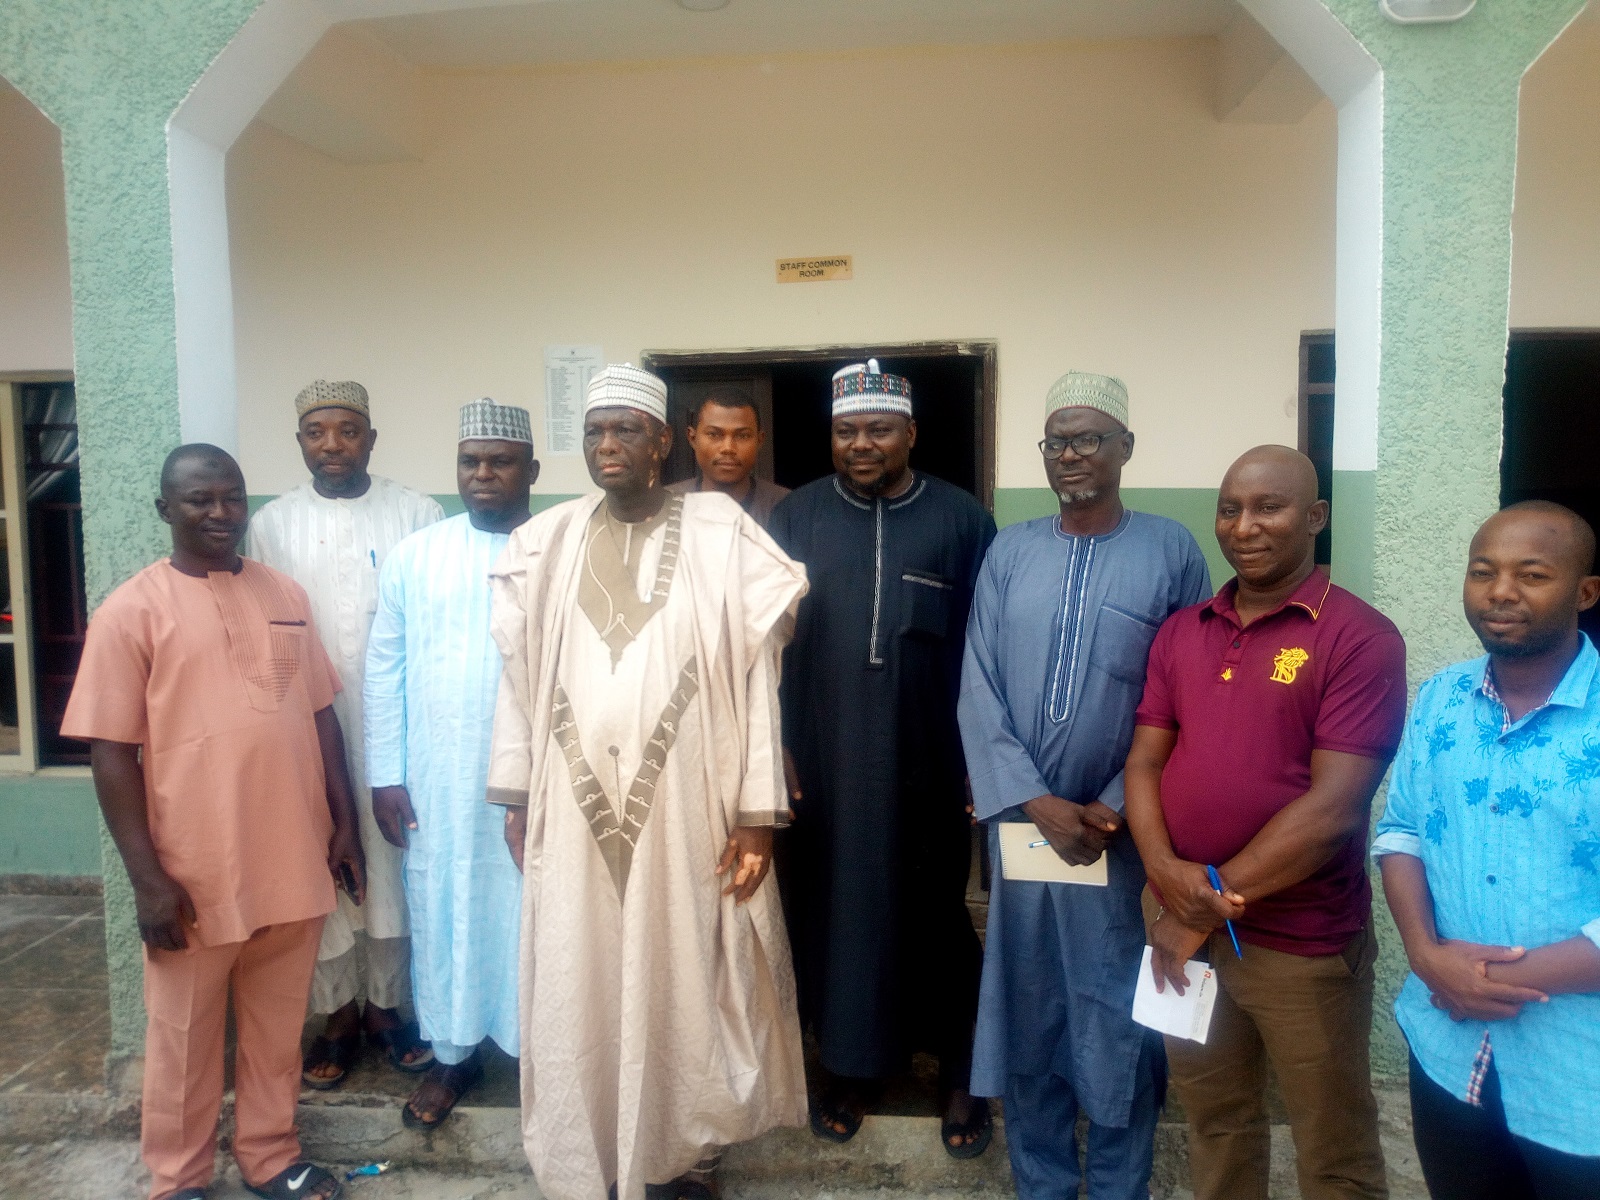 The Chairman of the Governing Council and Emir of Jiwa, HRH (Dr) Idris Musa MFR and Members of the Management Committee